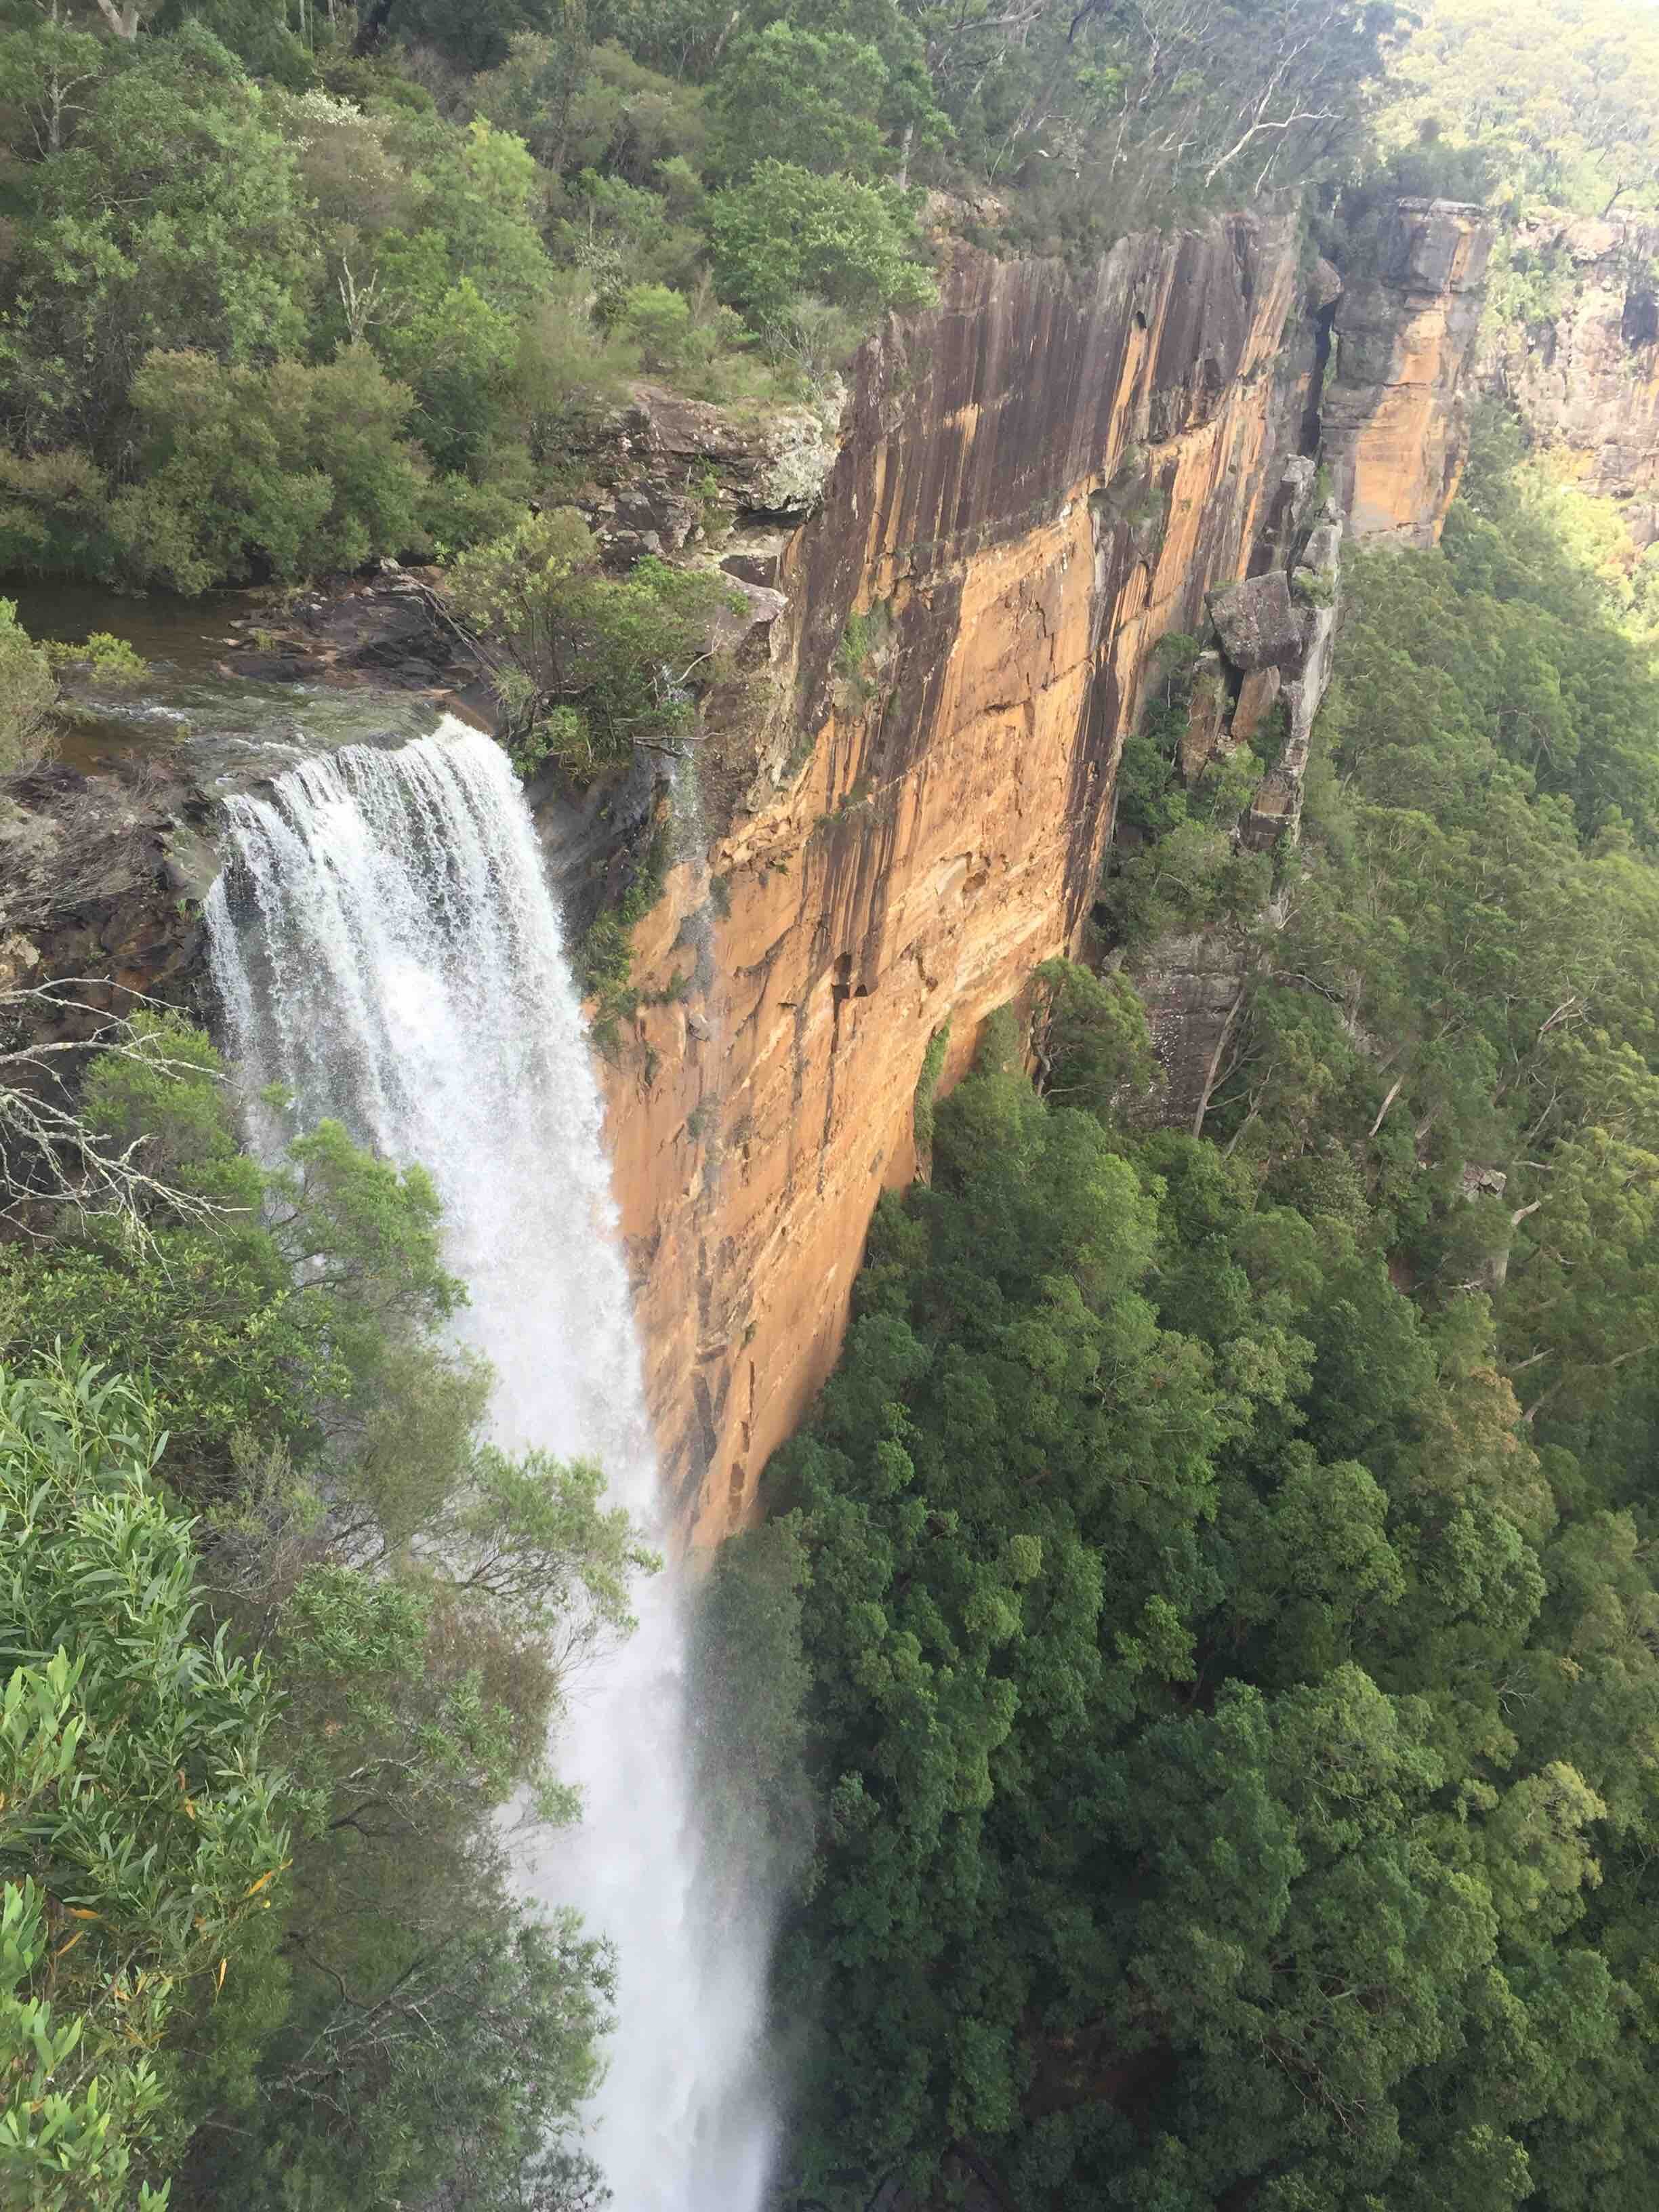 The spectacular Fitzroy Falls